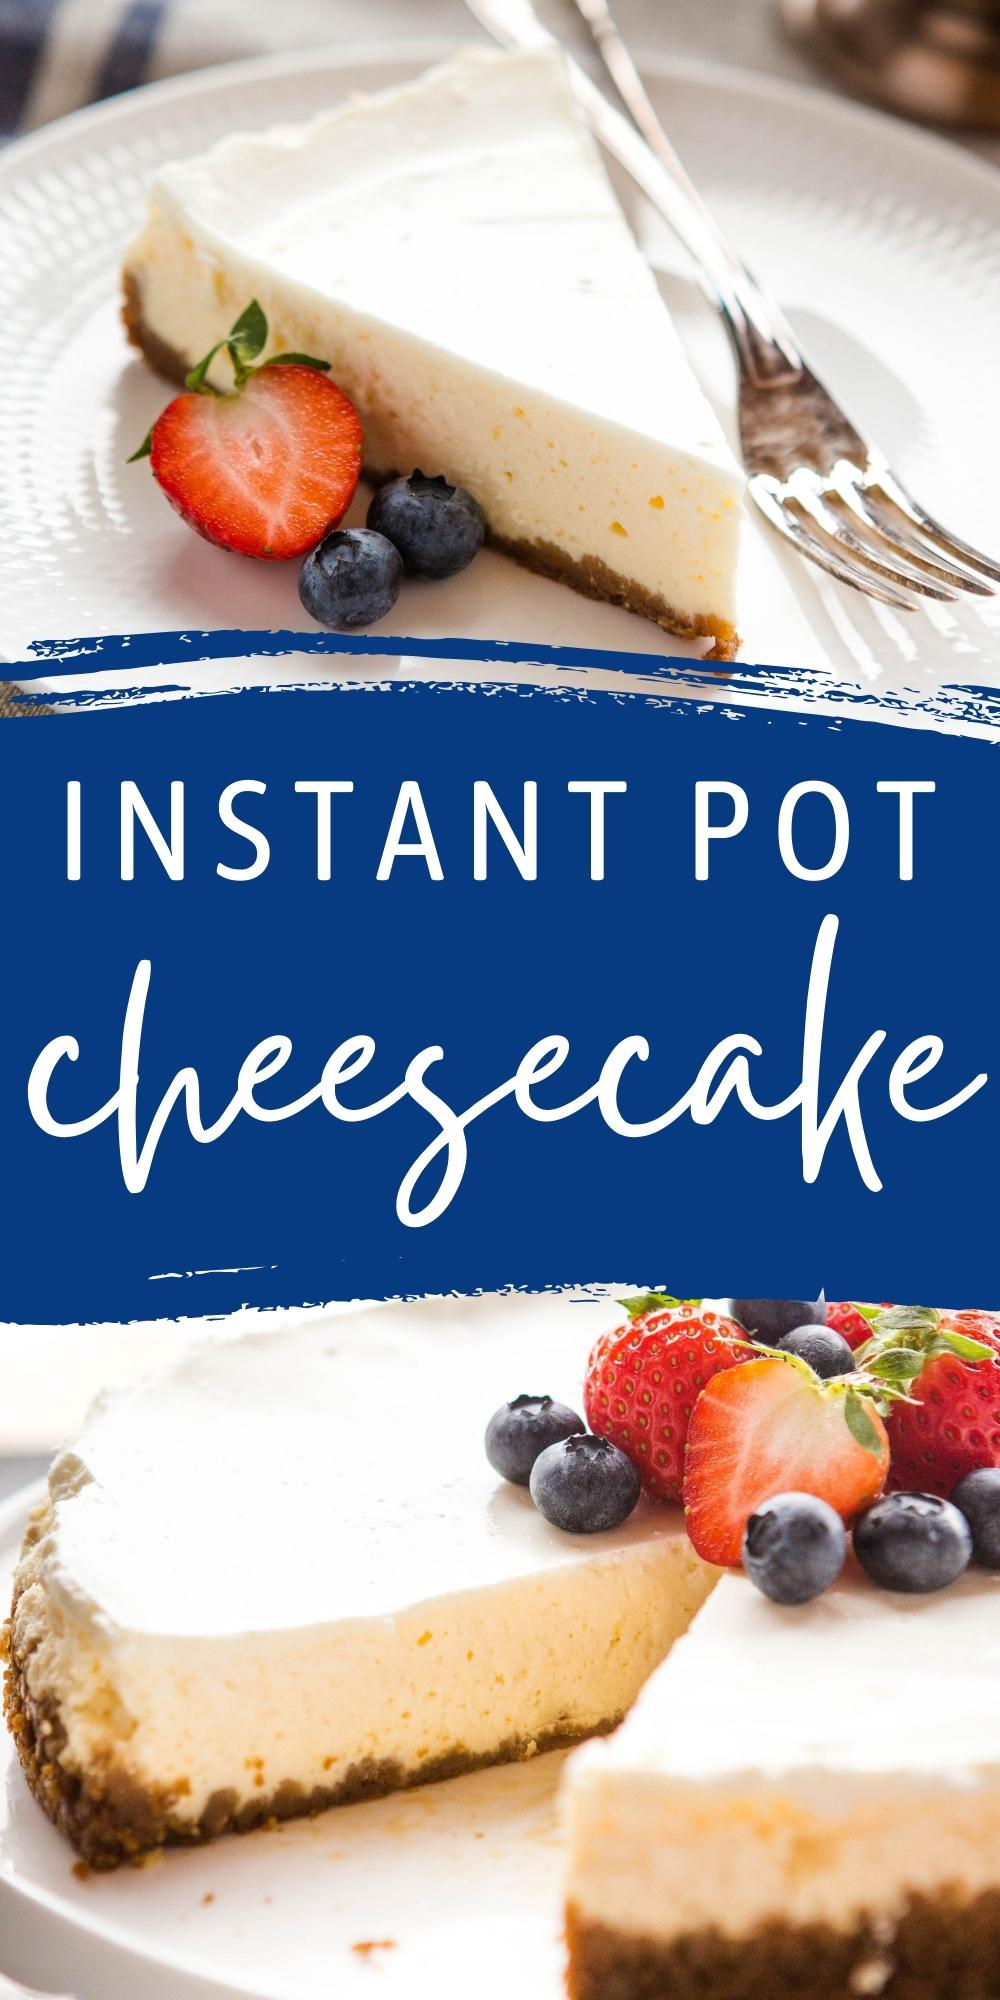 This Instant Pot Cheesecake is ultra soft and creamy and quick & easy to make! New York-style cheesecake that's baked in minutes in your electric pressure cooker! Recipe from thebusybaker.ca! #instantpotcheesecake #instantpot #baking #cheesecakerecipe #cheesecake #newyorkcheesecake #homemade #dessert via @busybakerblog